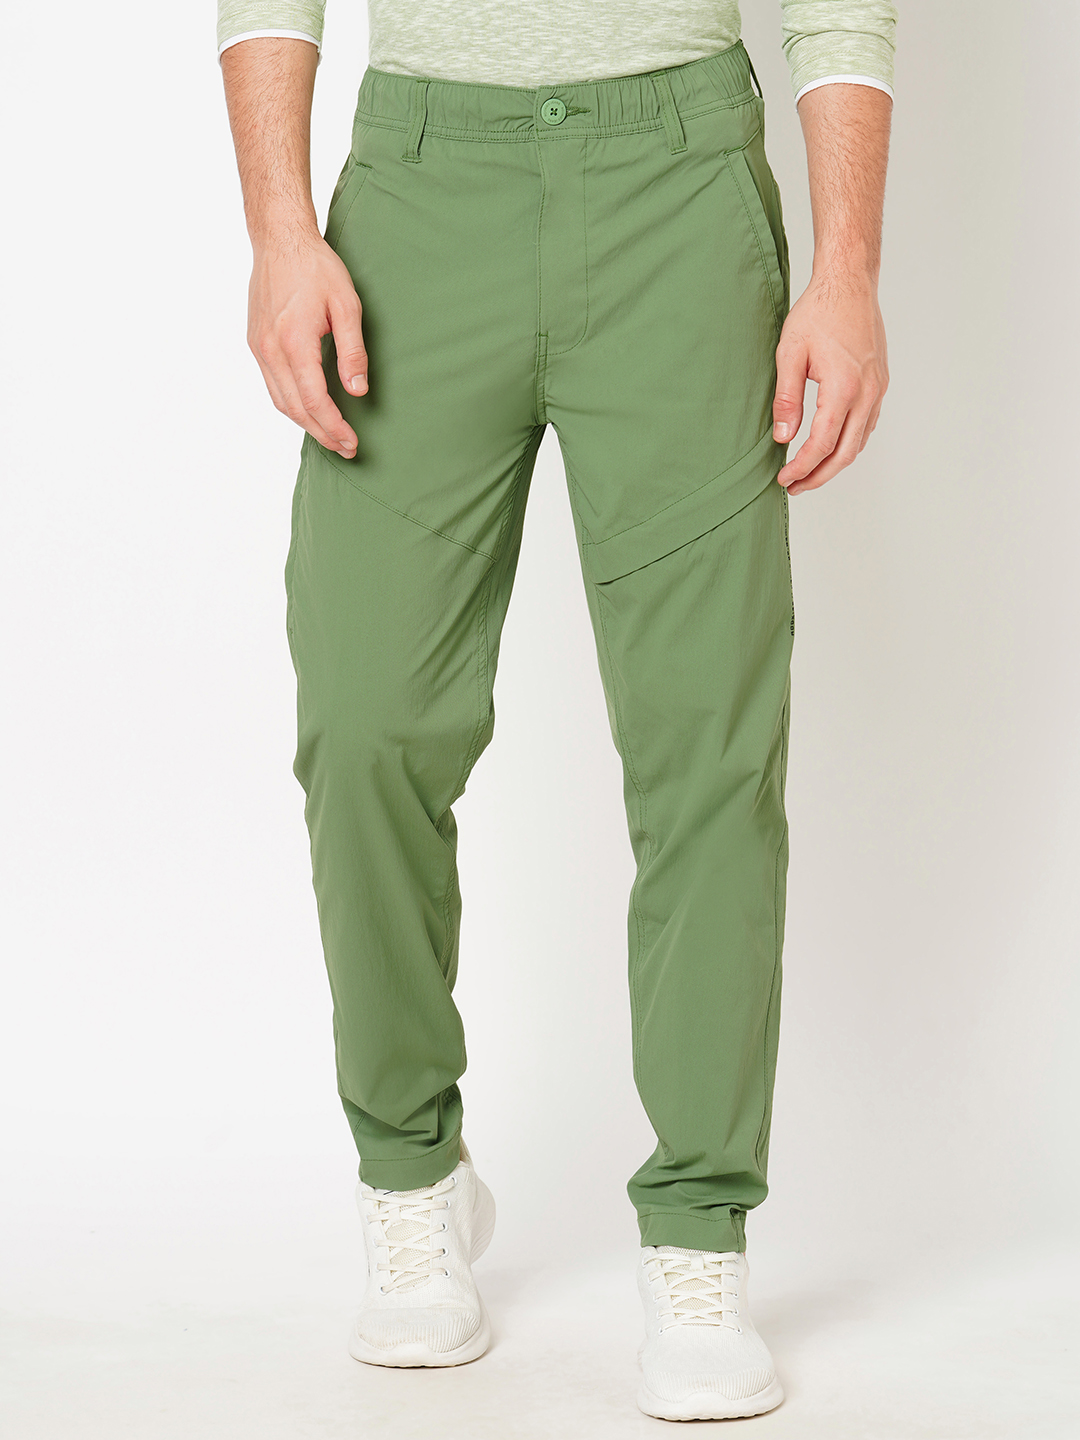 GREEN UTILITY PANT (SLIM TAPERED FIT)